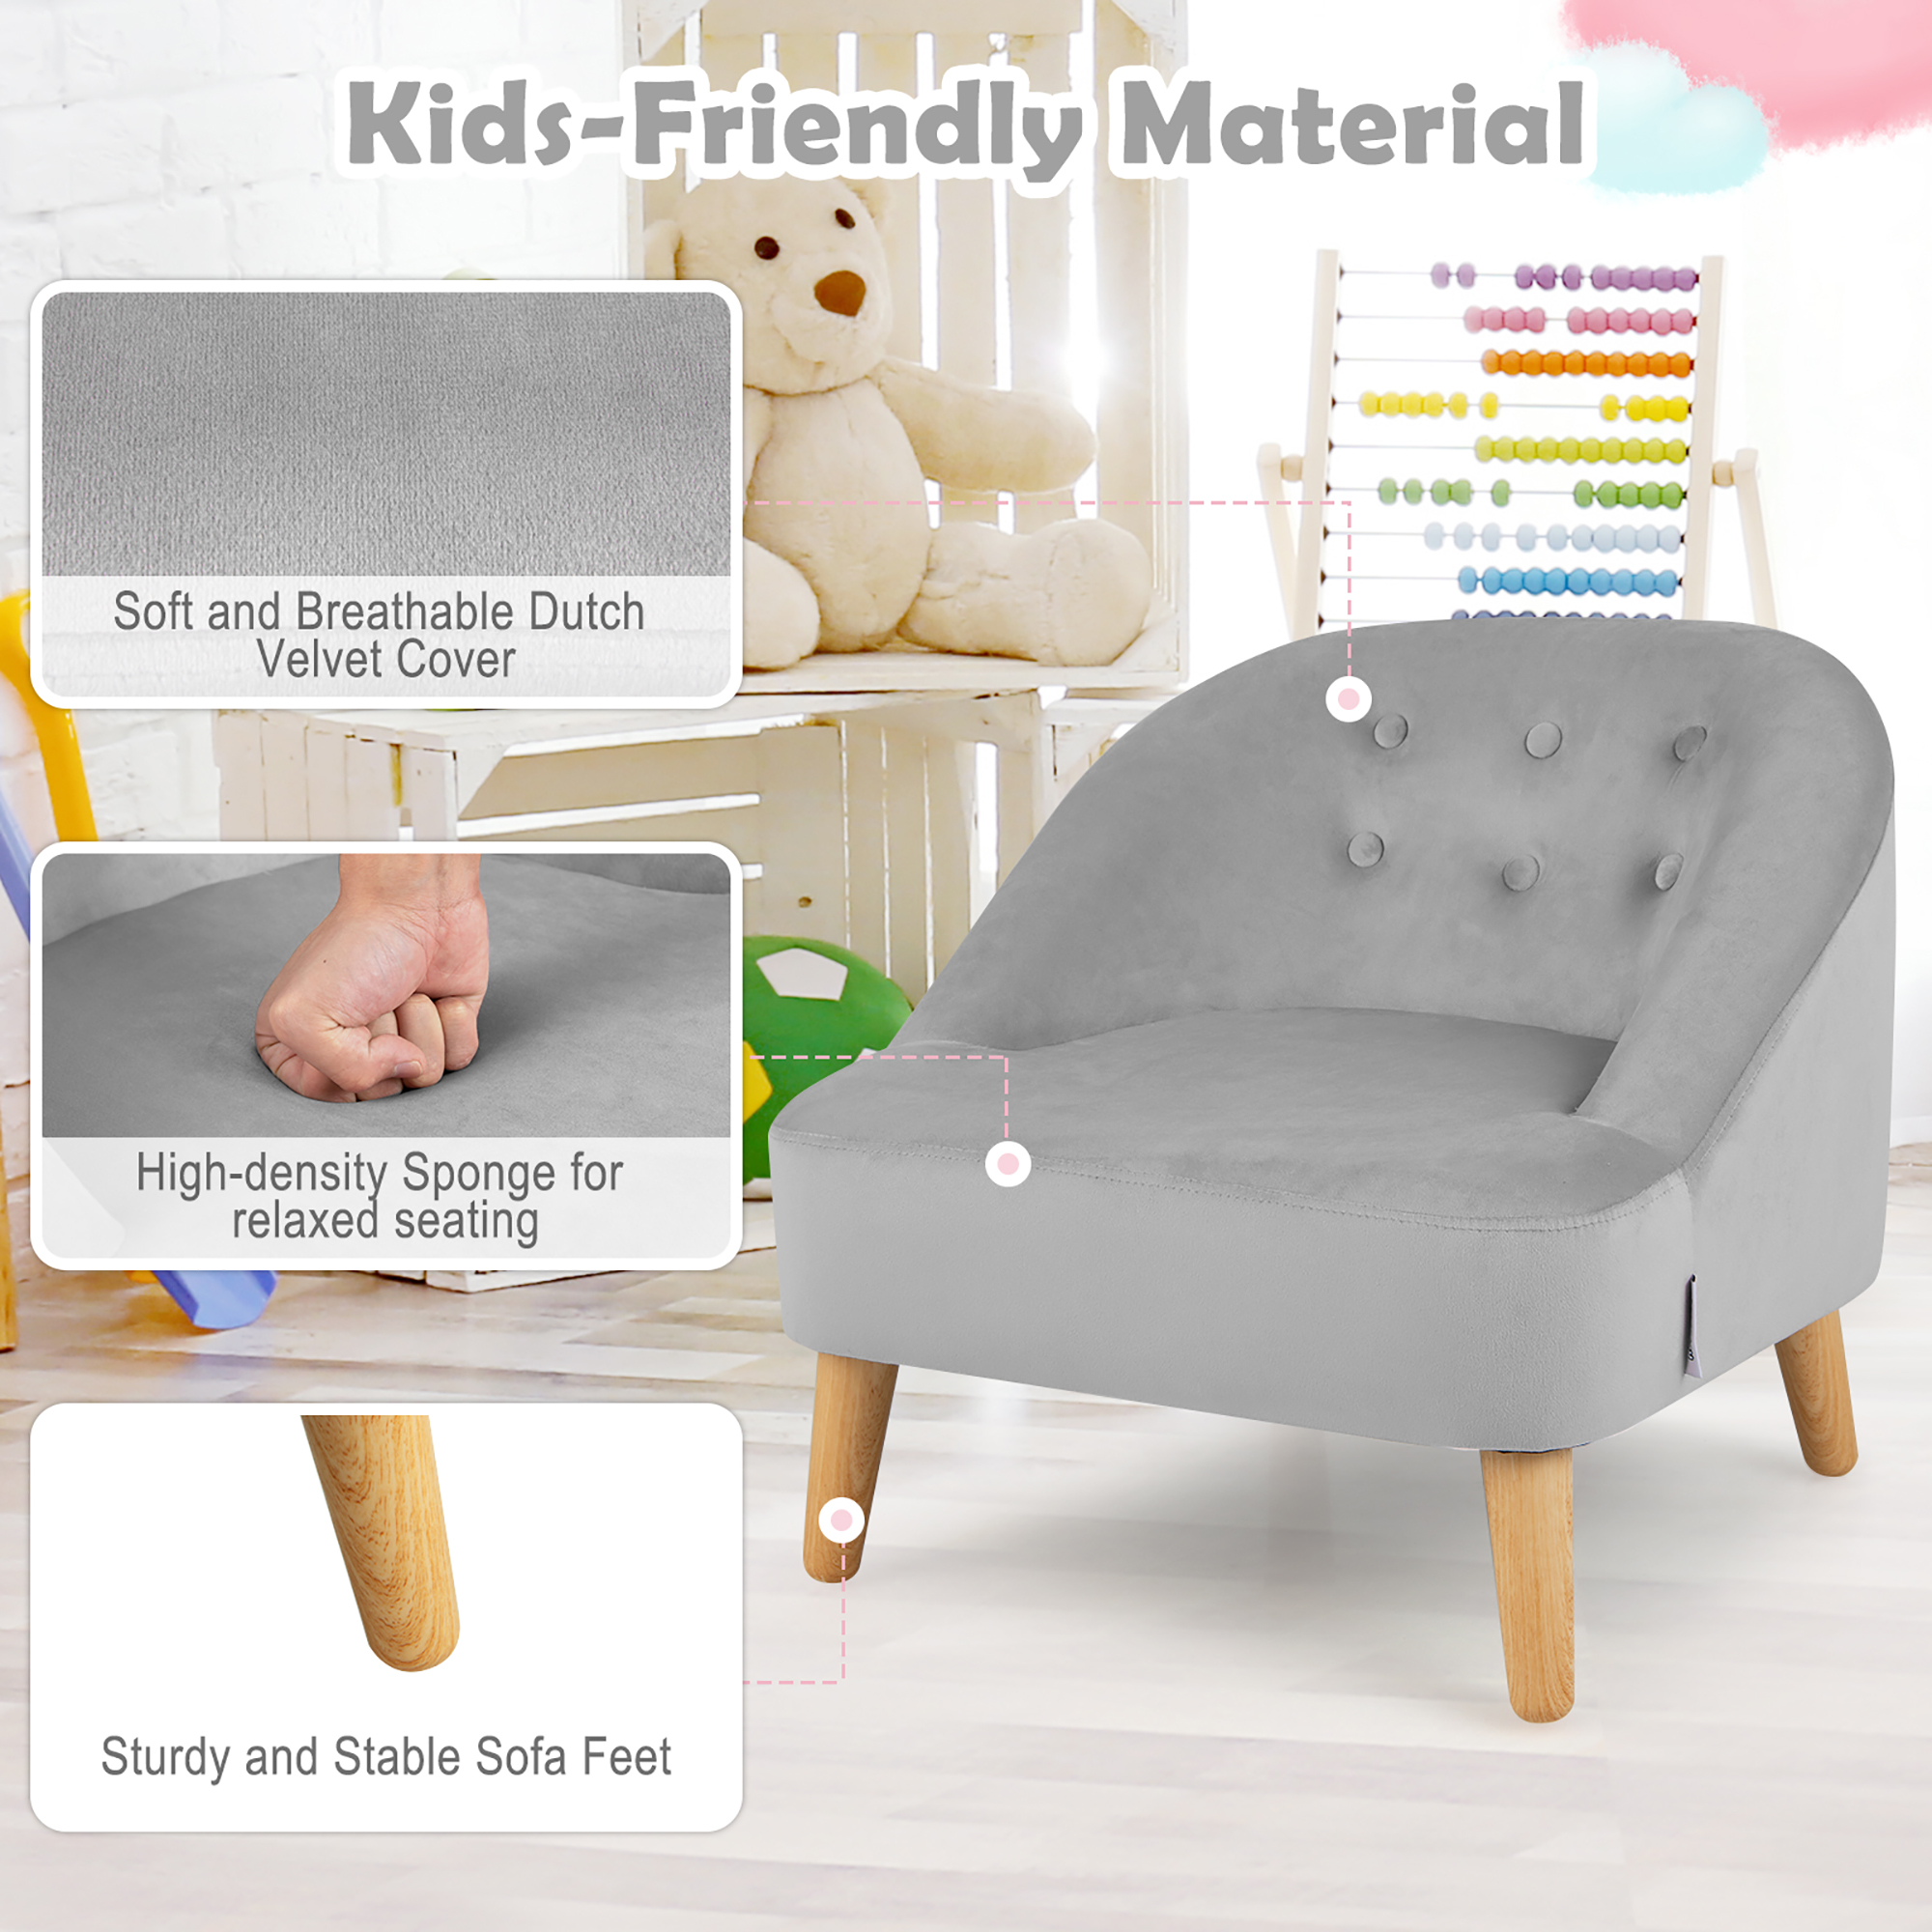 Costway Kids Sofa Chair w/ Ottoman Toddler Single Sofa Velvet Upholstered Couch Grey